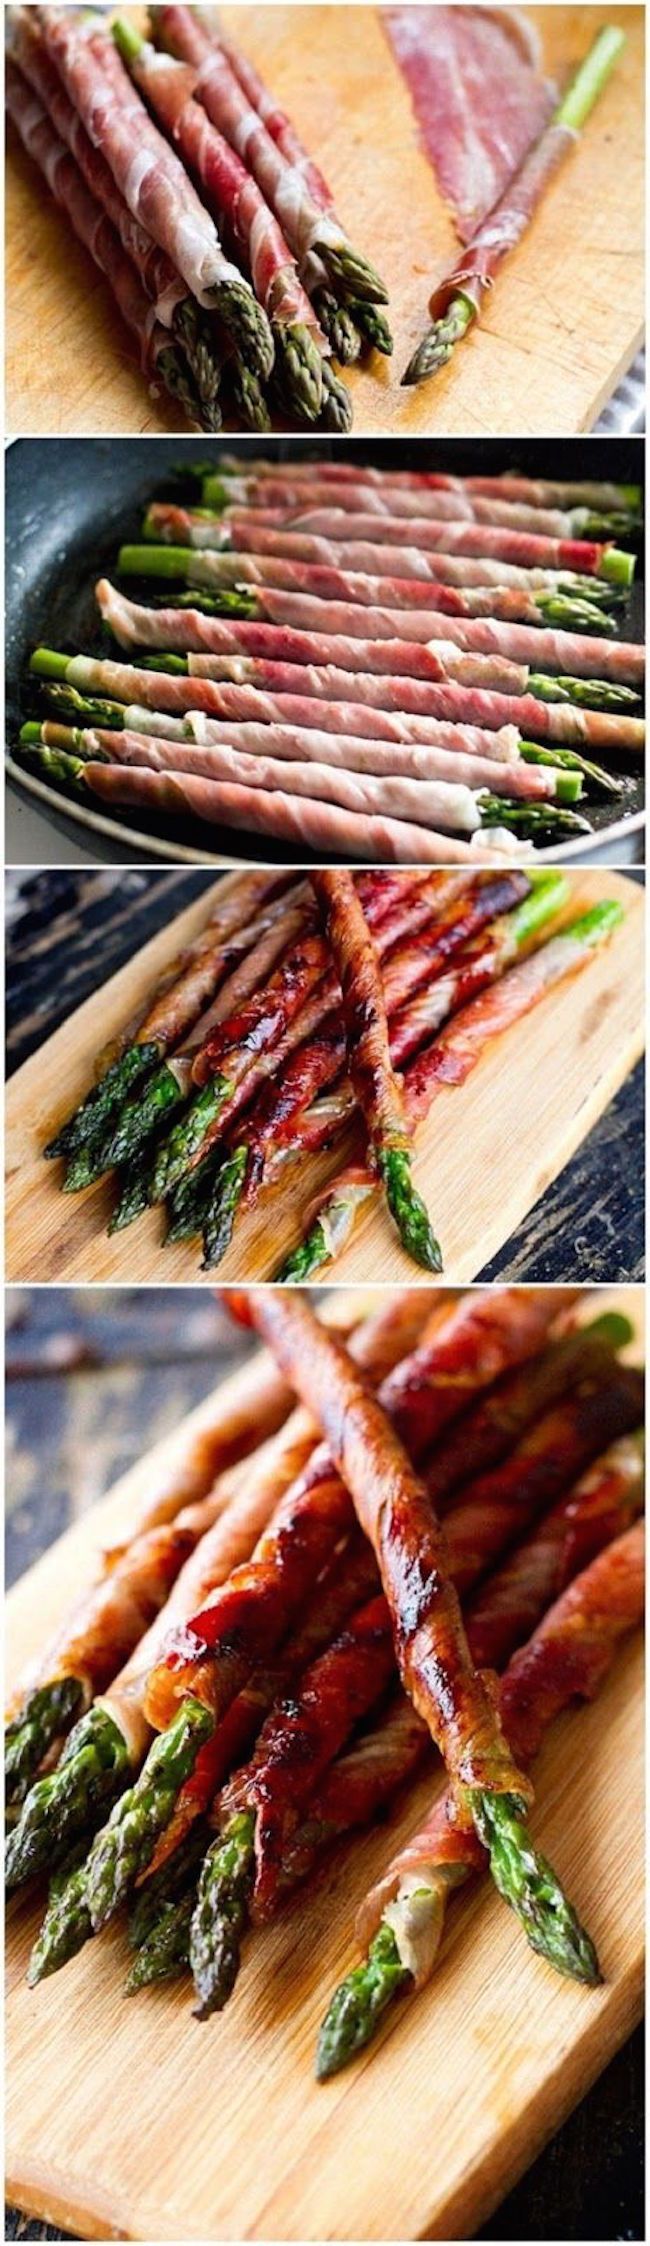 Prosciutto wrapped asparagus from Inspired Dreamer and 10 other great SUPER BOWL RECIPES!!!